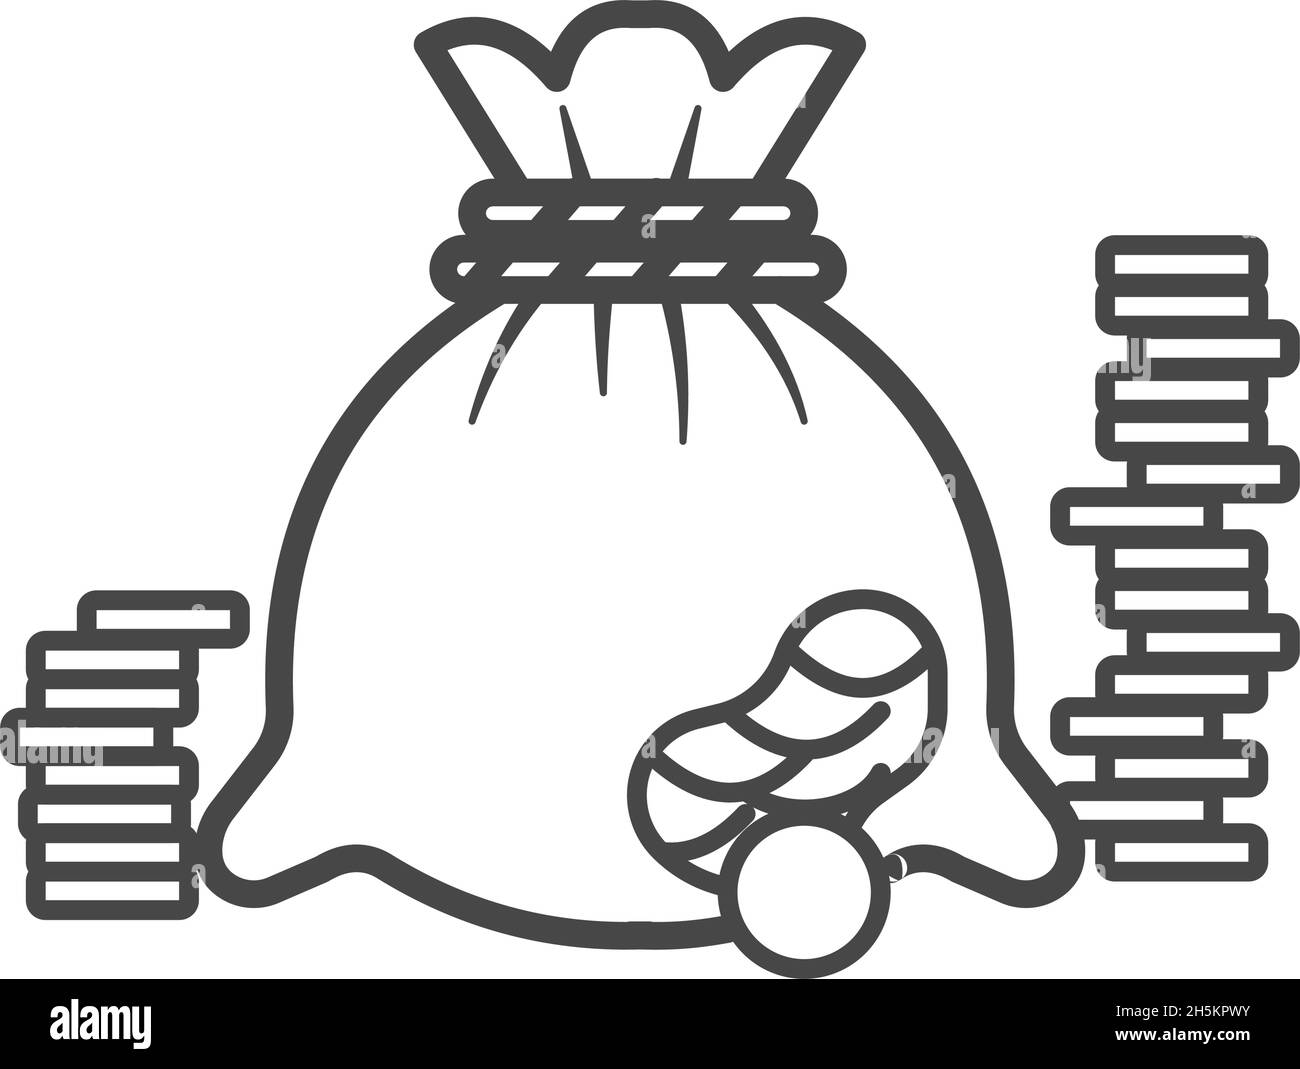 Torn money bag with coins and piles of coins. Savings, banking, money, finance, loan concept. Outline thin line illustration. Isolated Stock Vector